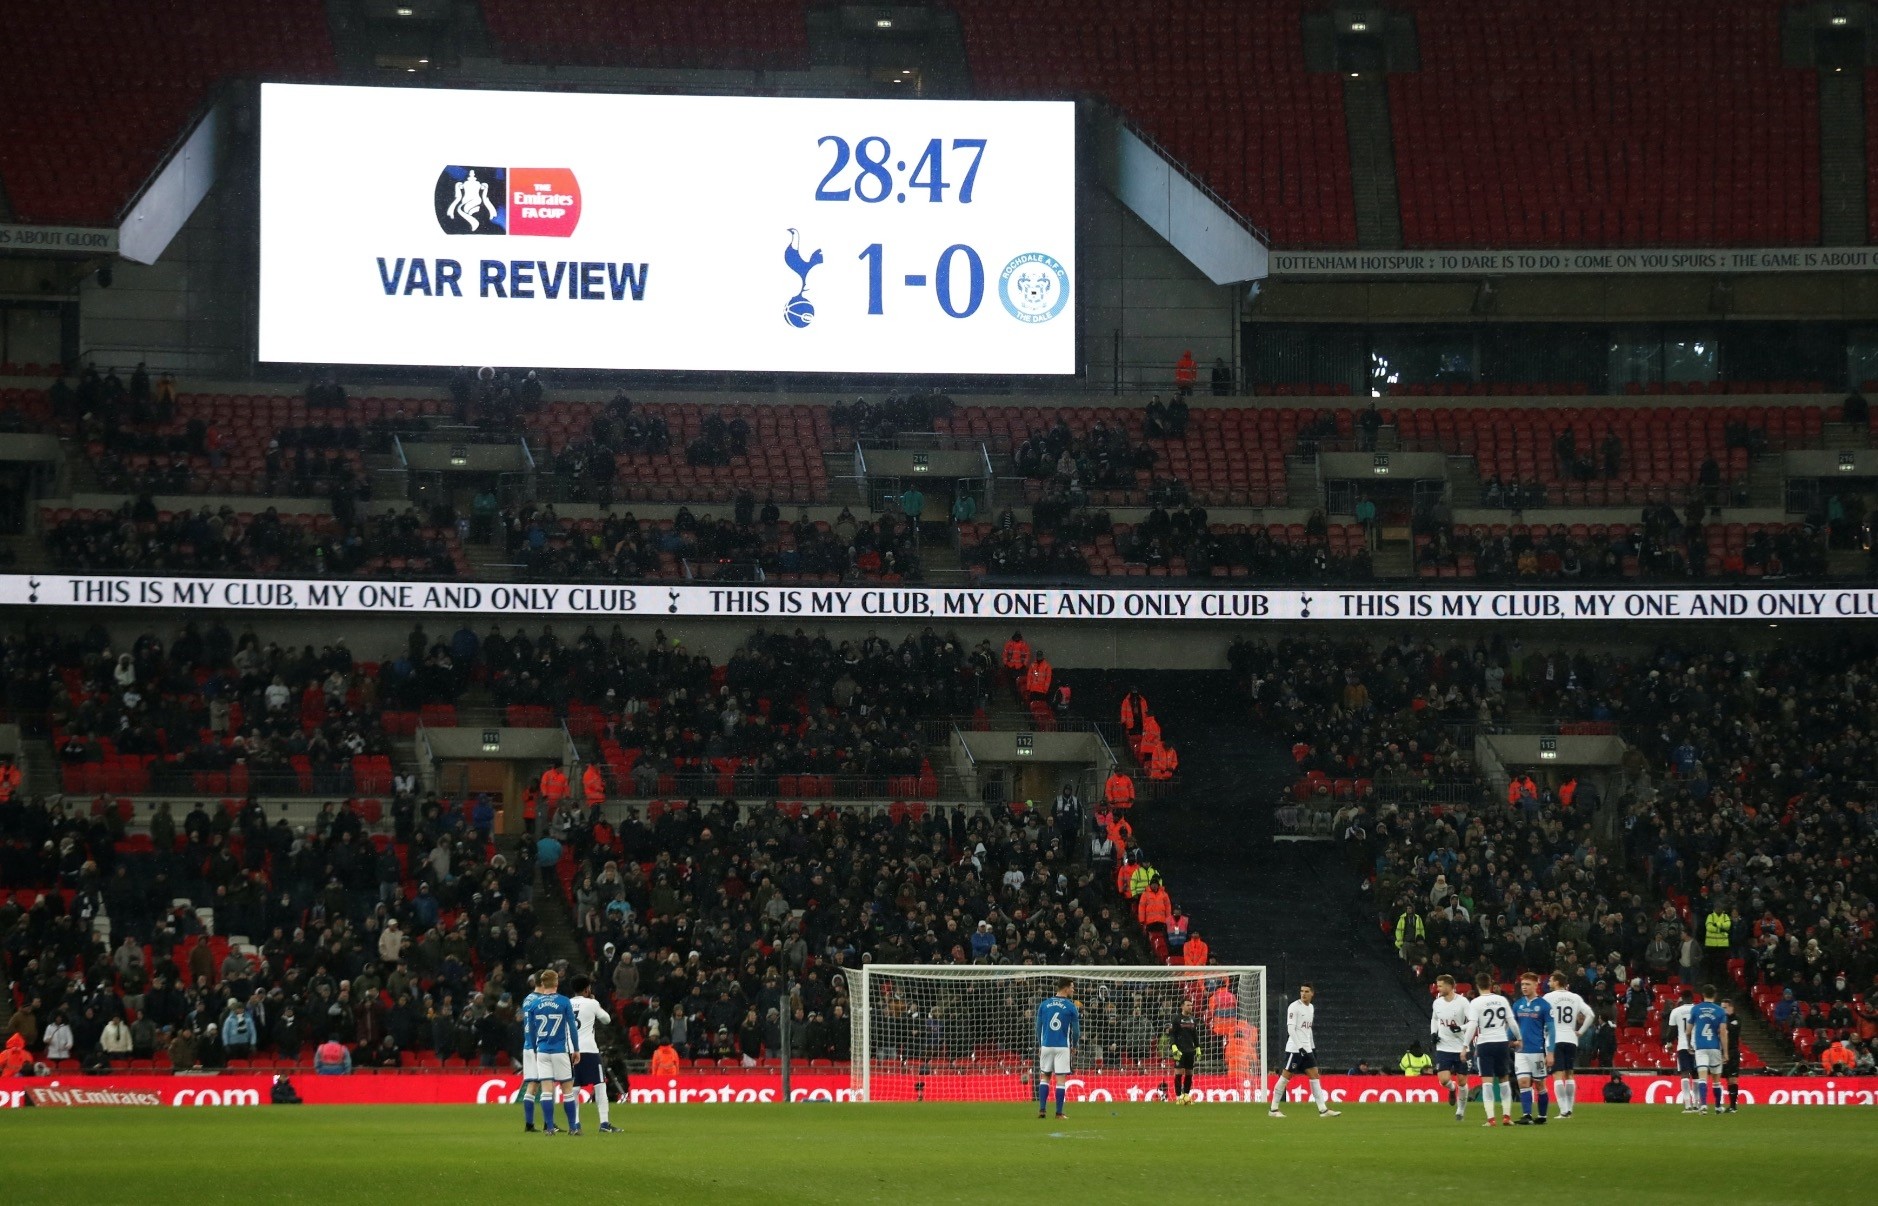 The big screen displays that a decision has been referred to VAR (Video Assistant Referee) during the FA Cup Fifth Round match between Tottenham Hotspur vs Rochdale at the Wembley Stadium, London.